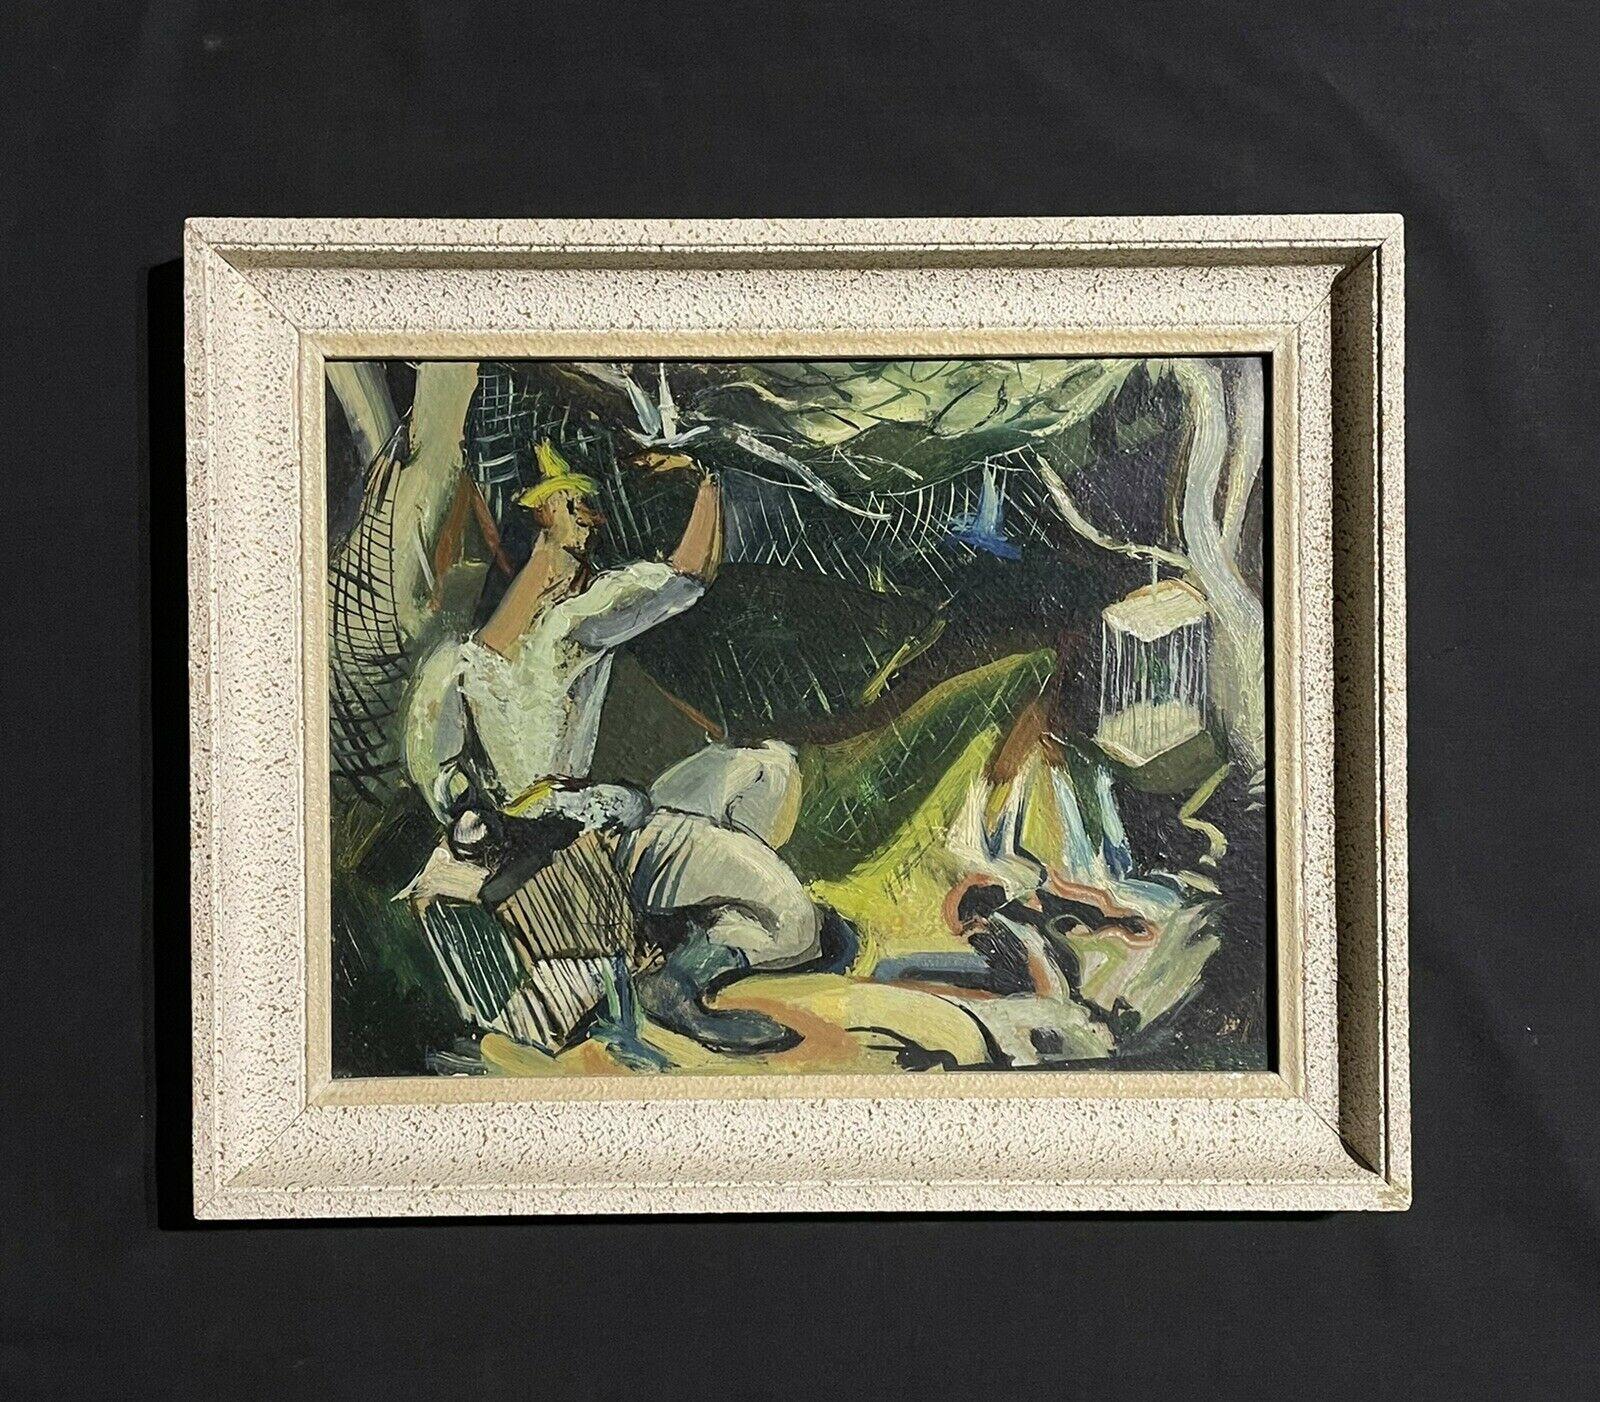 Artist/ School: French School, mid 20th century

Title: The Birdcages

Medium: oil painting on board, framed. 

framed:  15 x 21.75 inches

Provenance: private collection, France

Condition: The painting is in overall good and sound condition.
 